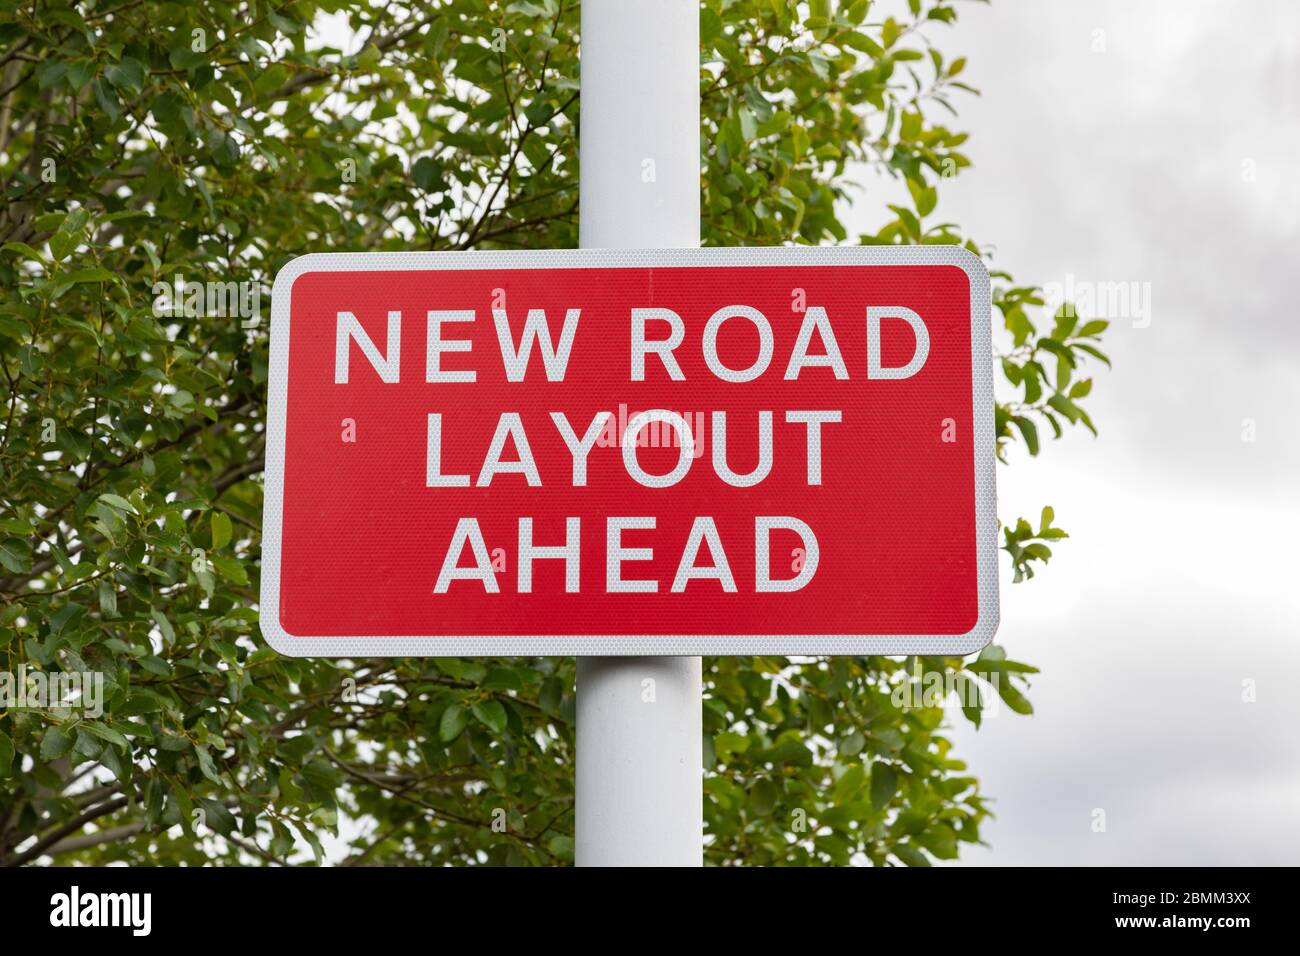 road sign indicating new road layout ahead birkenhead wirral august 2019 Stock Photo